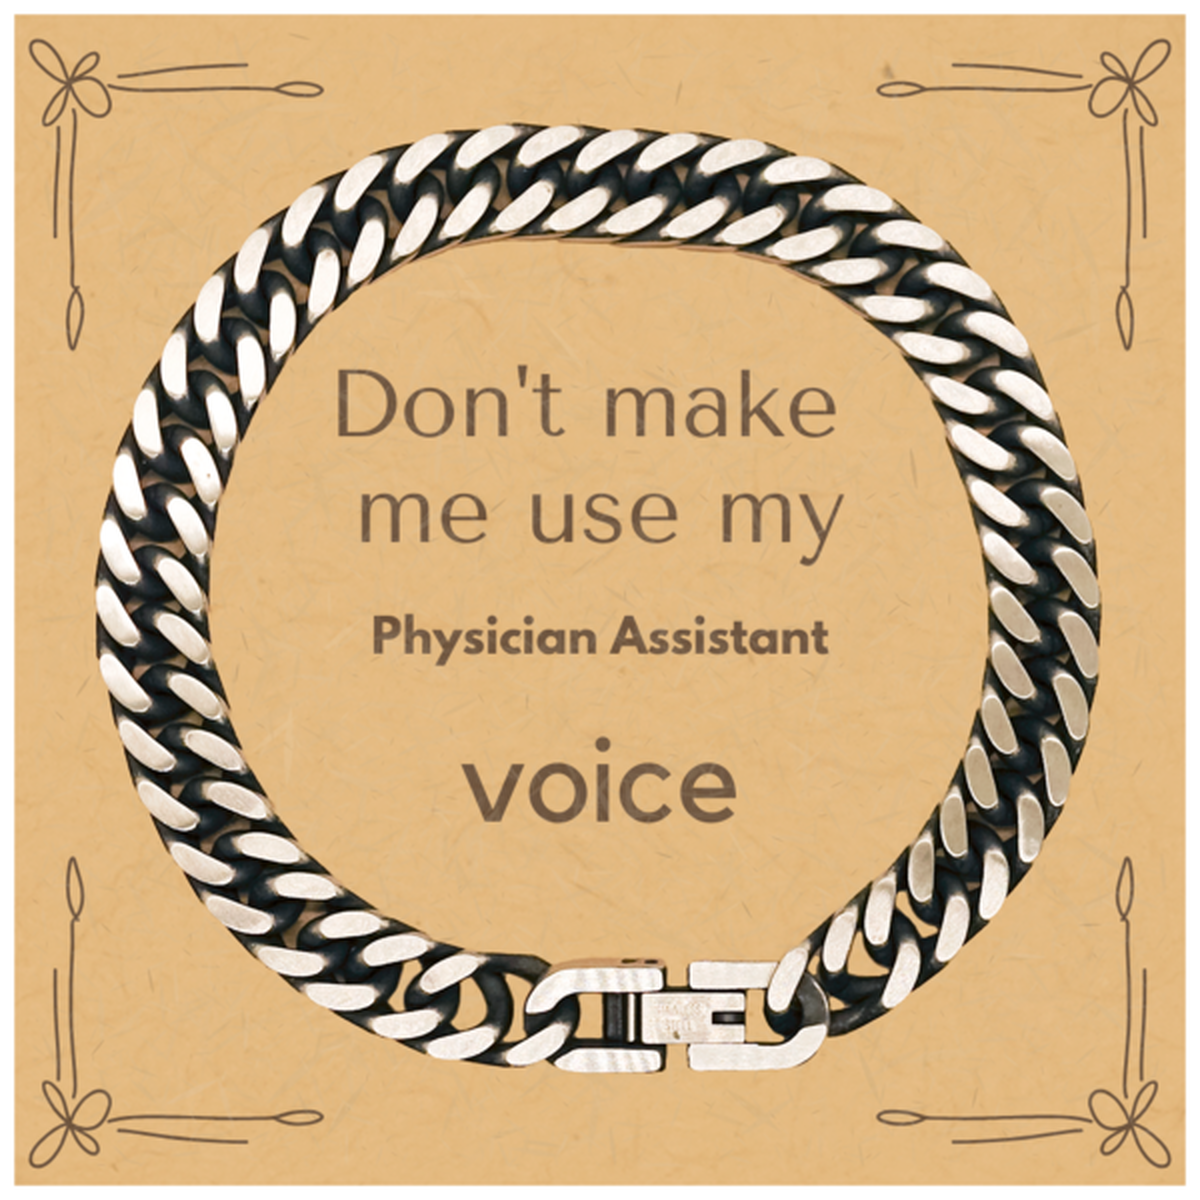 Don't make me use my Physician Assistant voice, Sarcasm Physician Assistant Card Gifts, Christmas Physician Assistant Cuban Link Chain Bracelet Birthday Unique Gifts For Physician Assistant Coworkers, Men, Women, Colleague, Friends